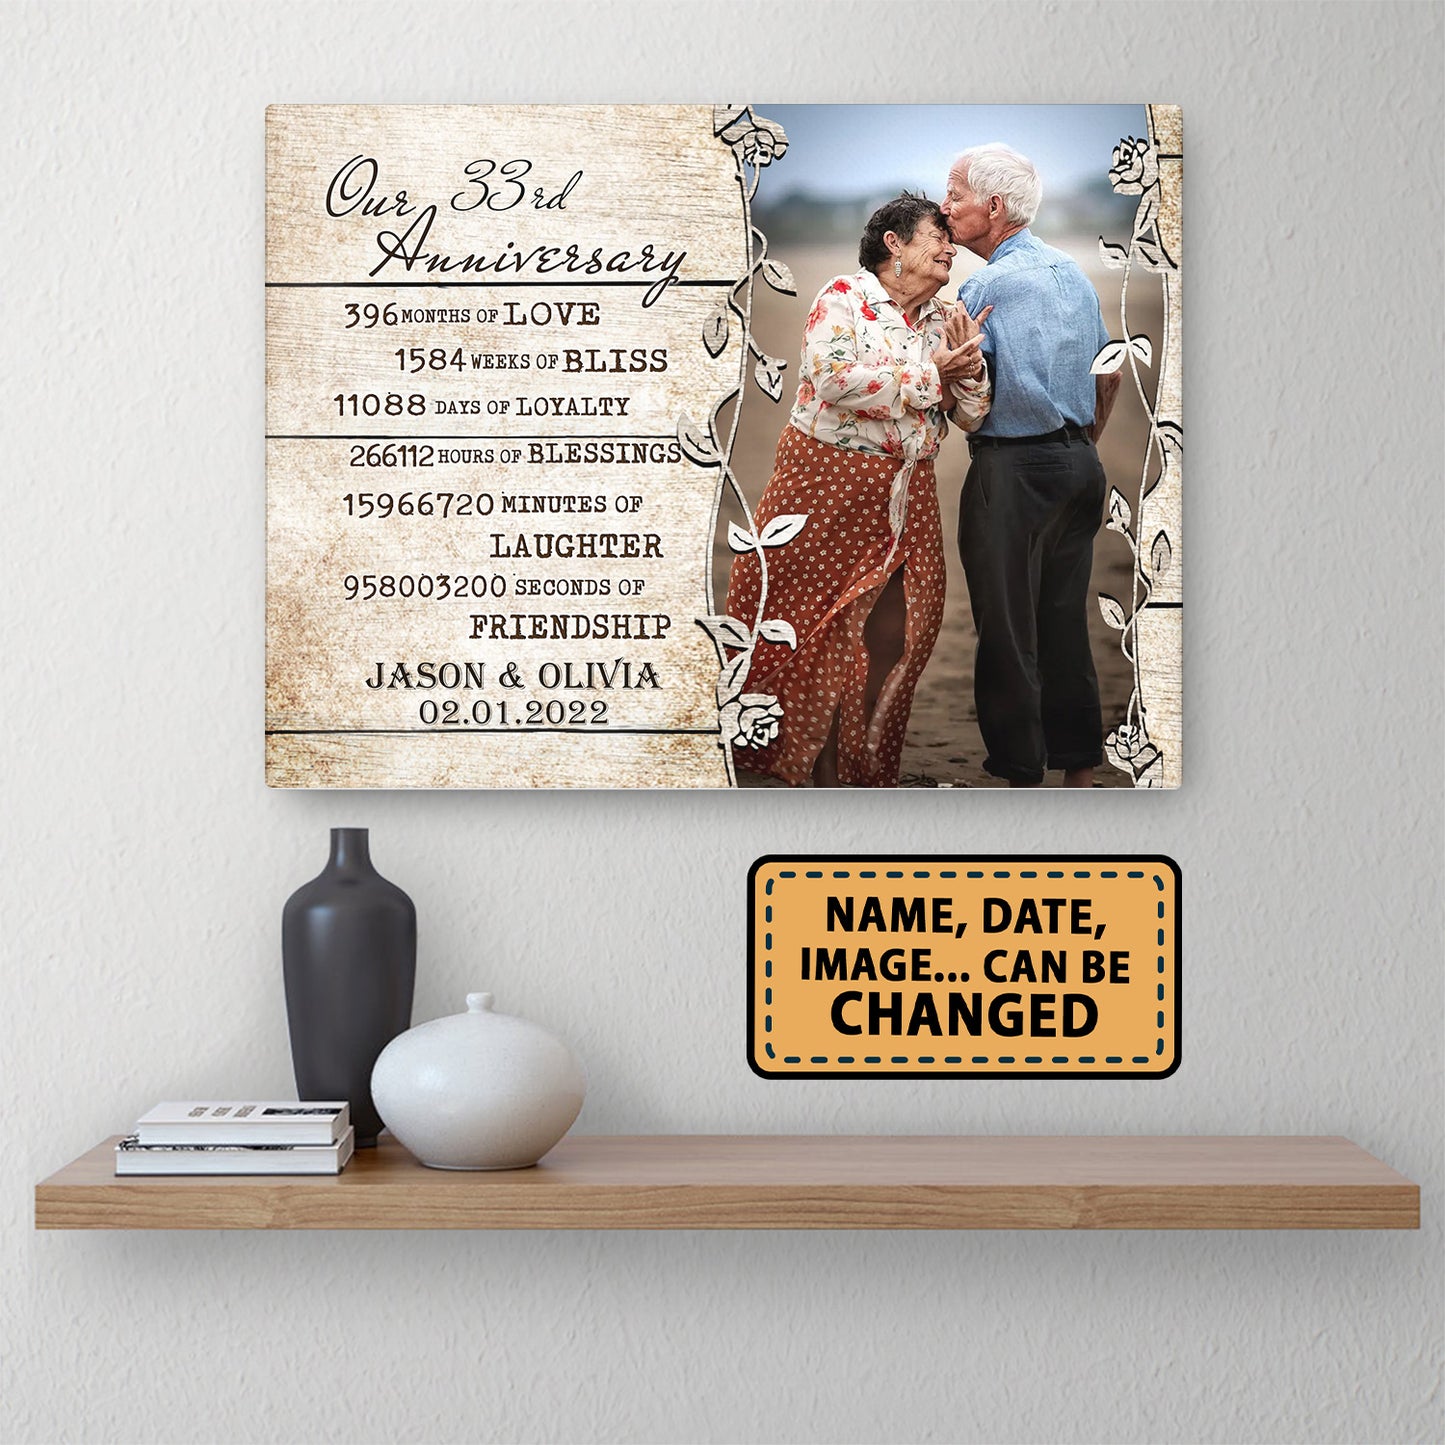 Our 33rd Anniversary Timeless love Valentine Gift Personalized Canvas